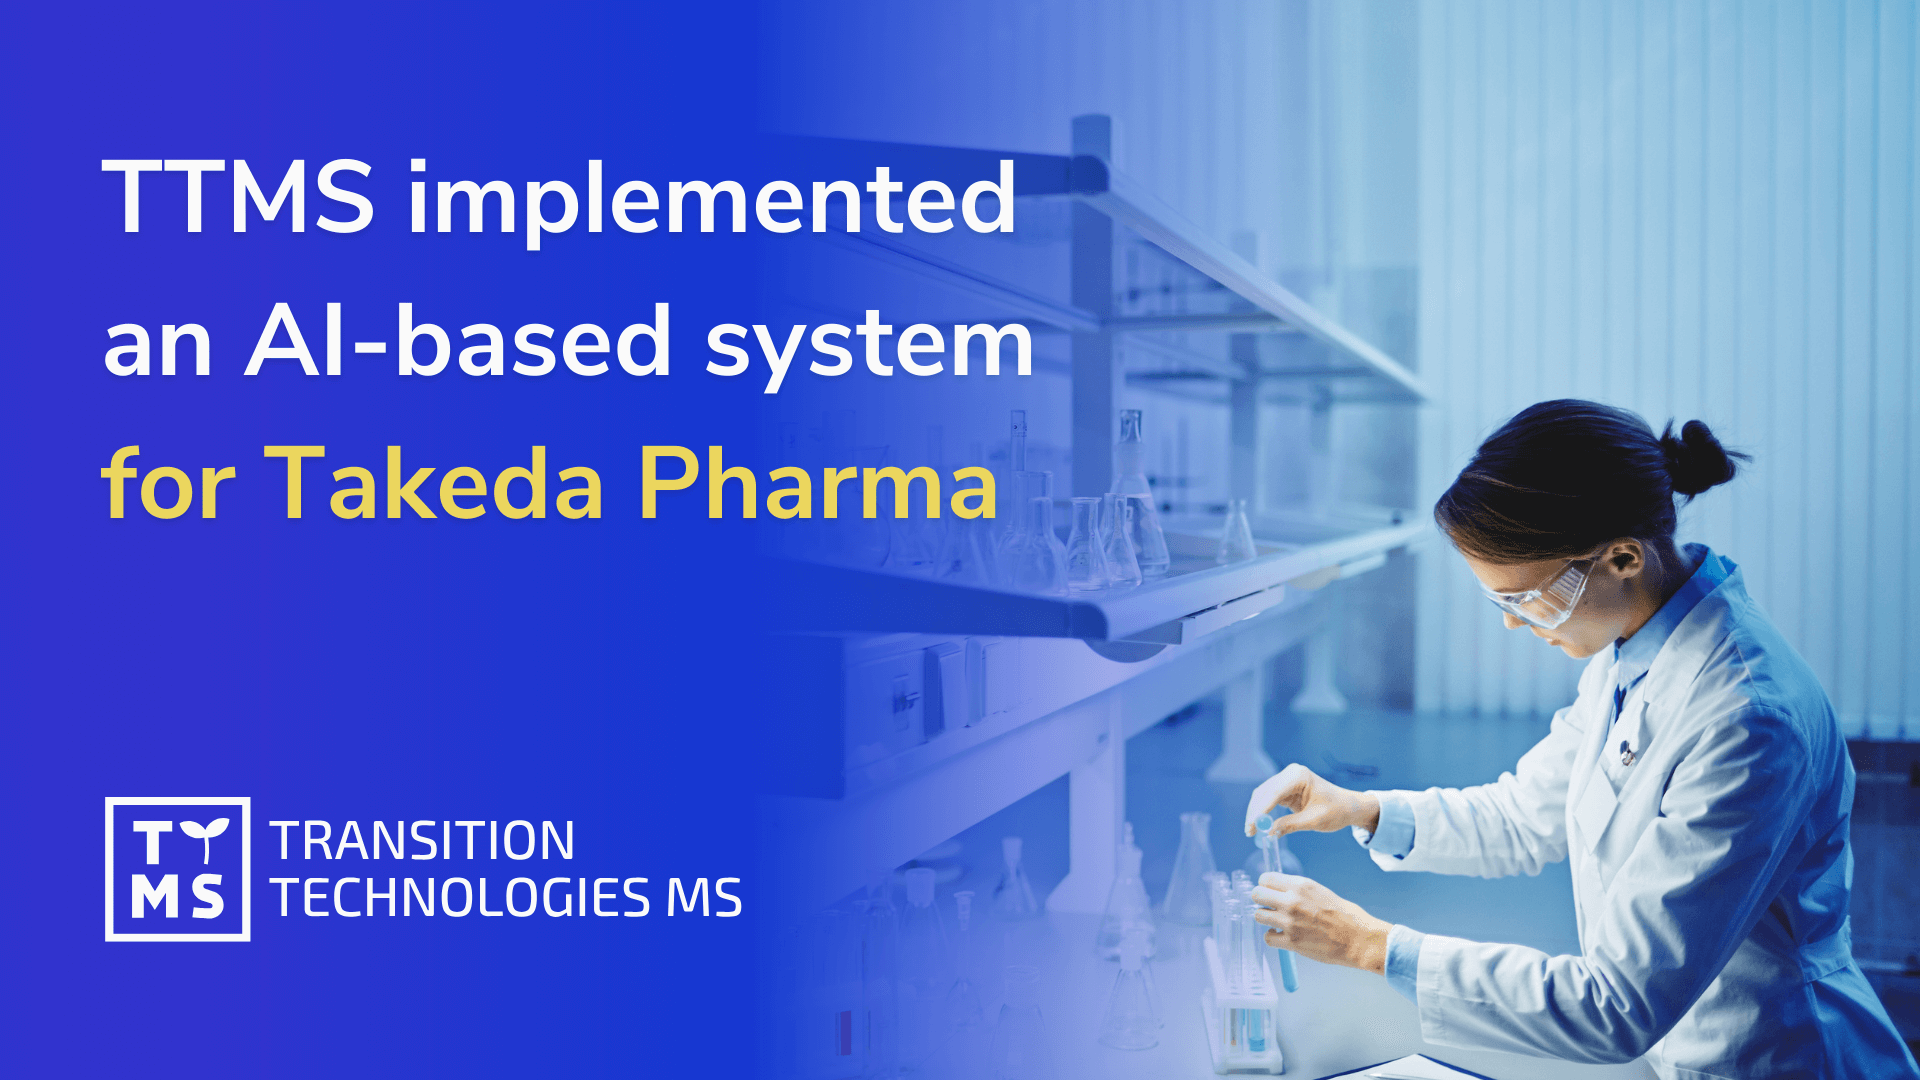 TTMS implemented an AI-based system for Takeda Pharma